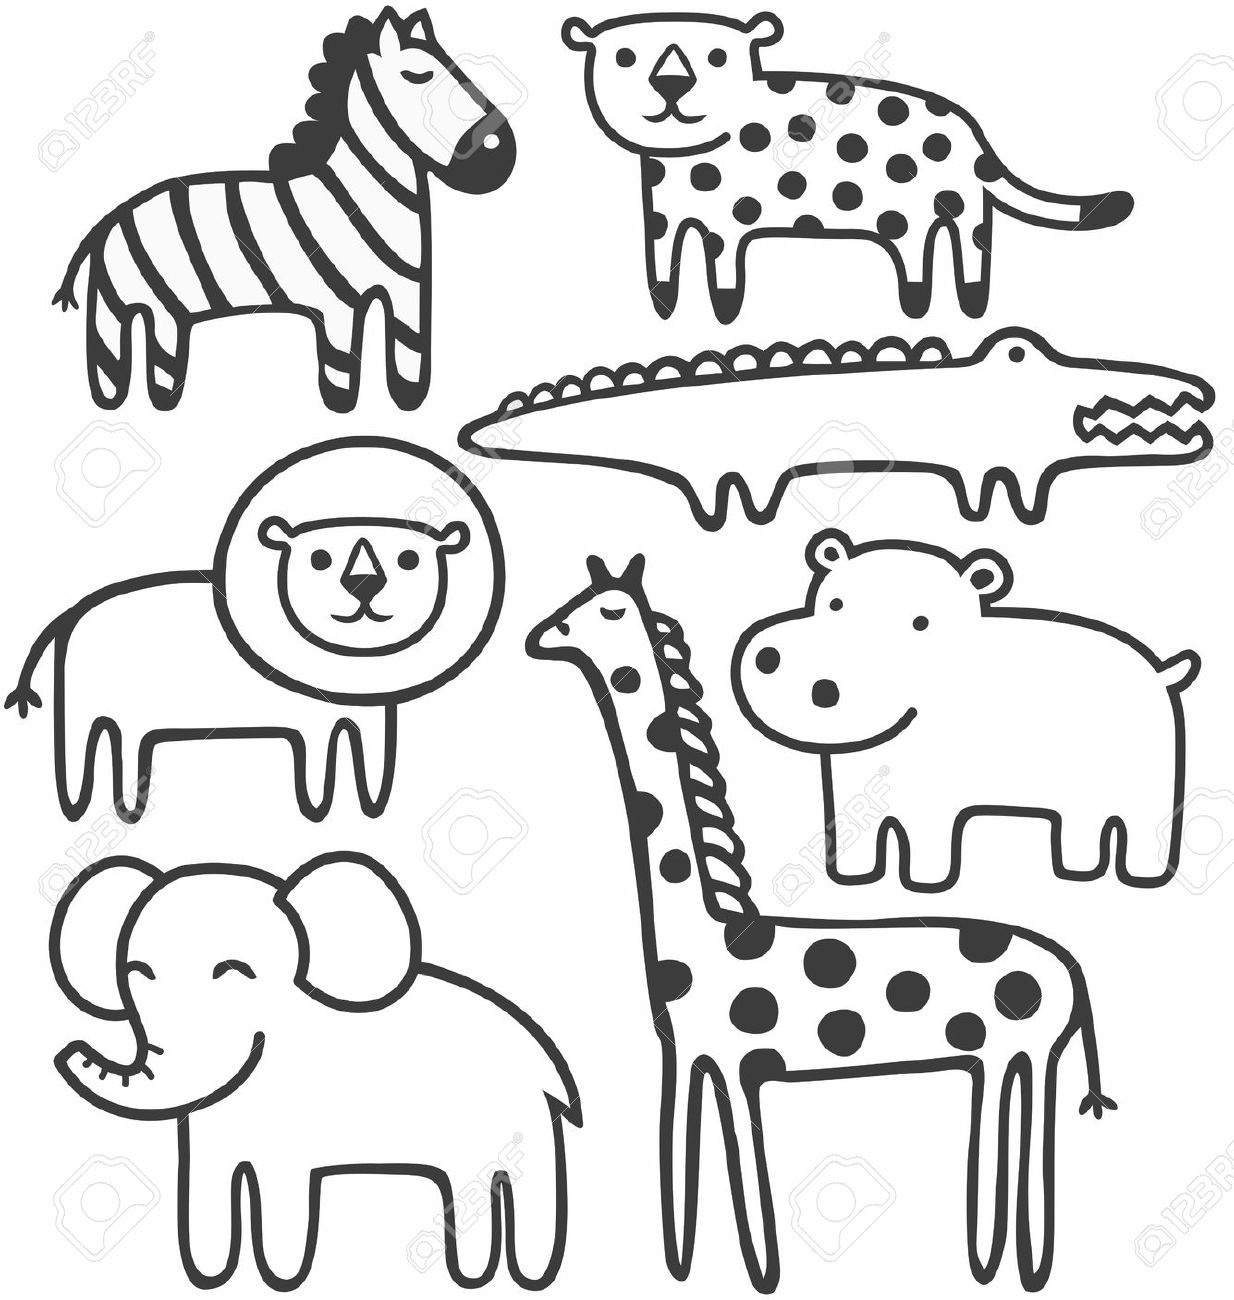 1232 Zoo Animals free clipart.